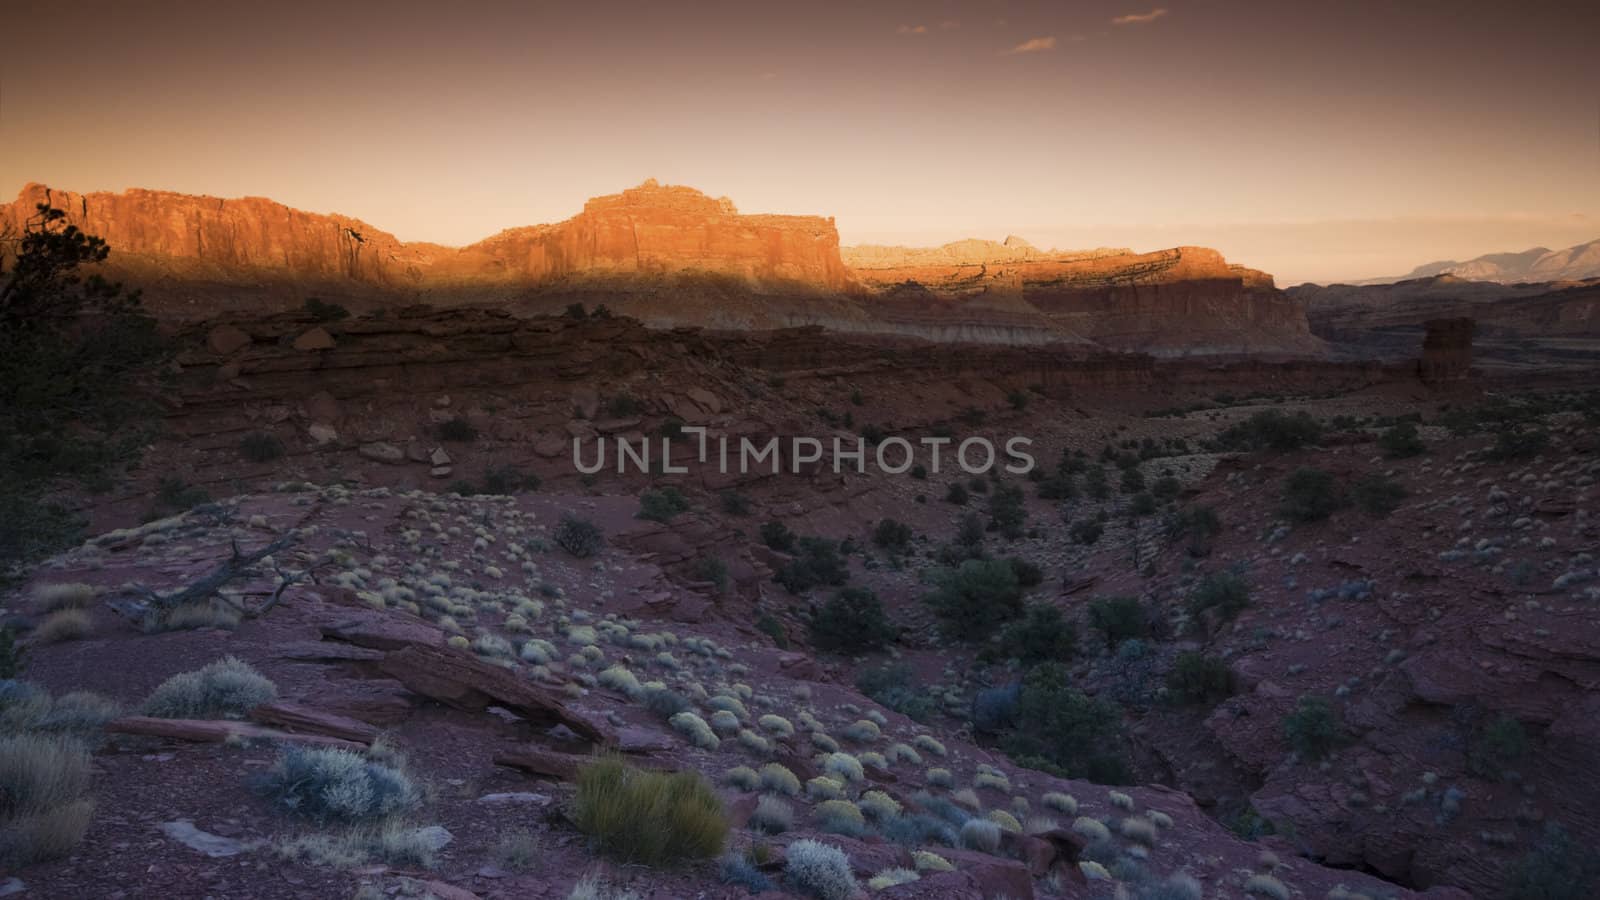 Last rays of the day on the rocks - Capitol Reef National Park.